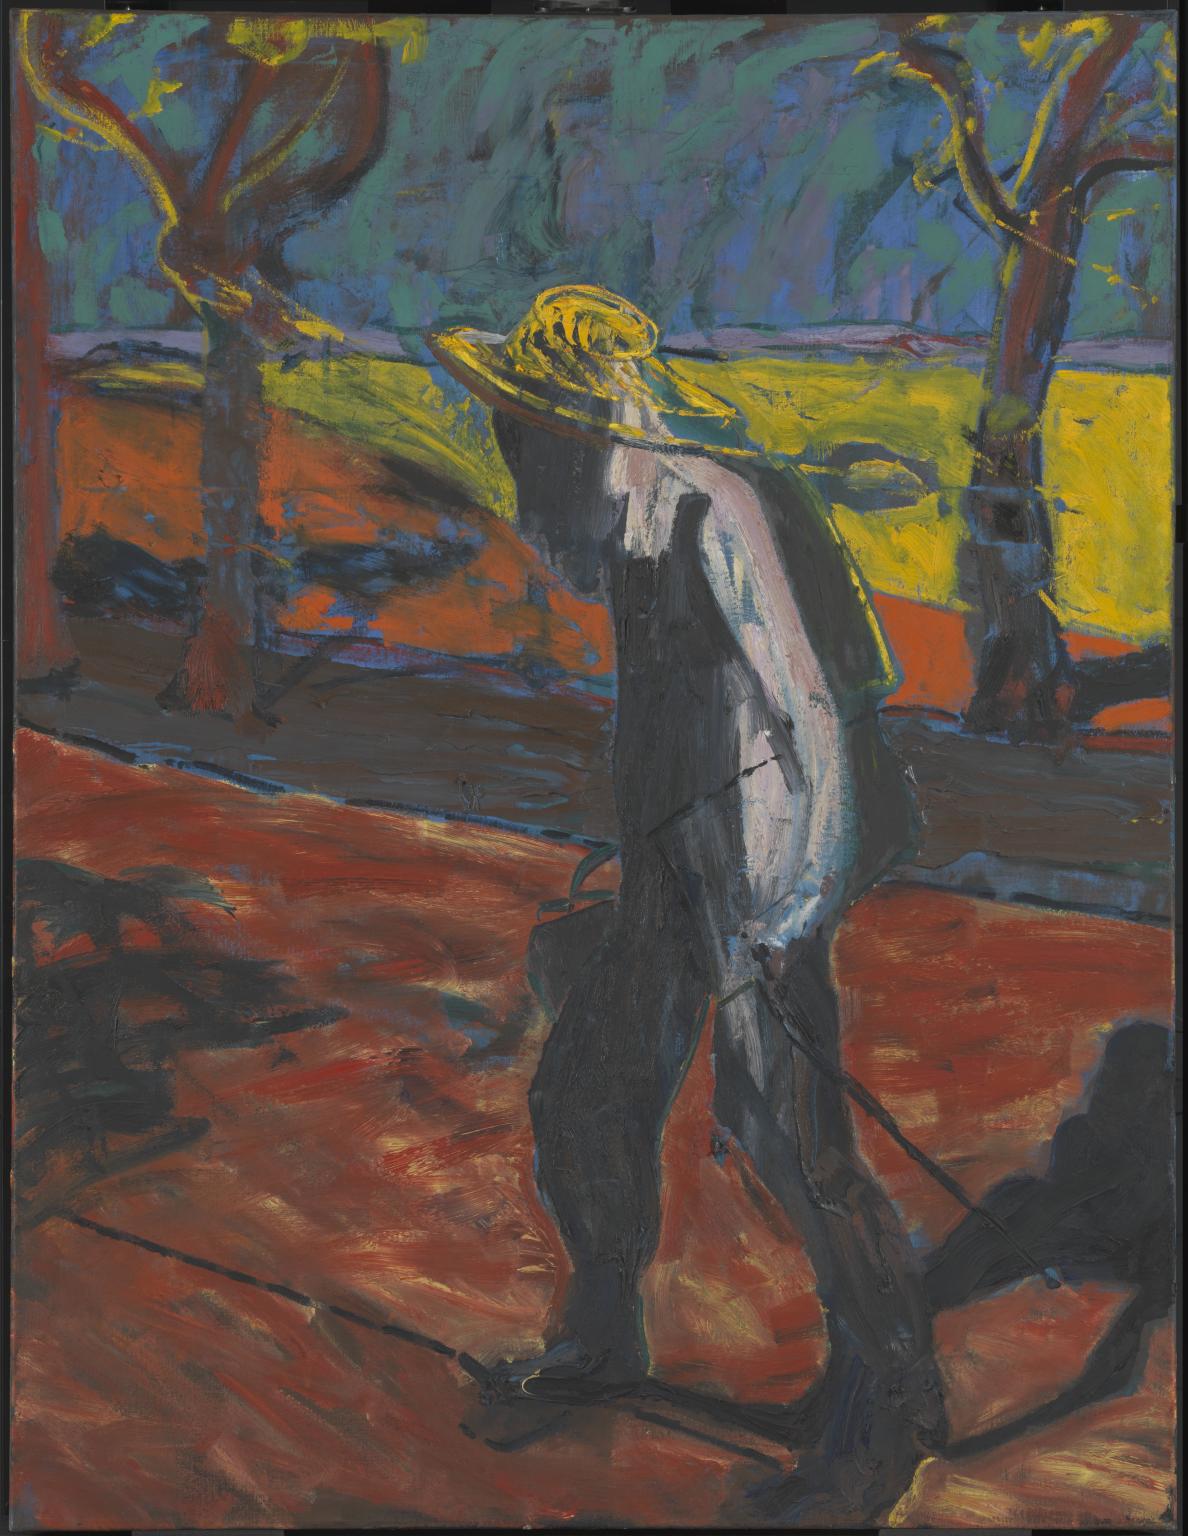 Vincent Van Gogh and the Darker Side of Art